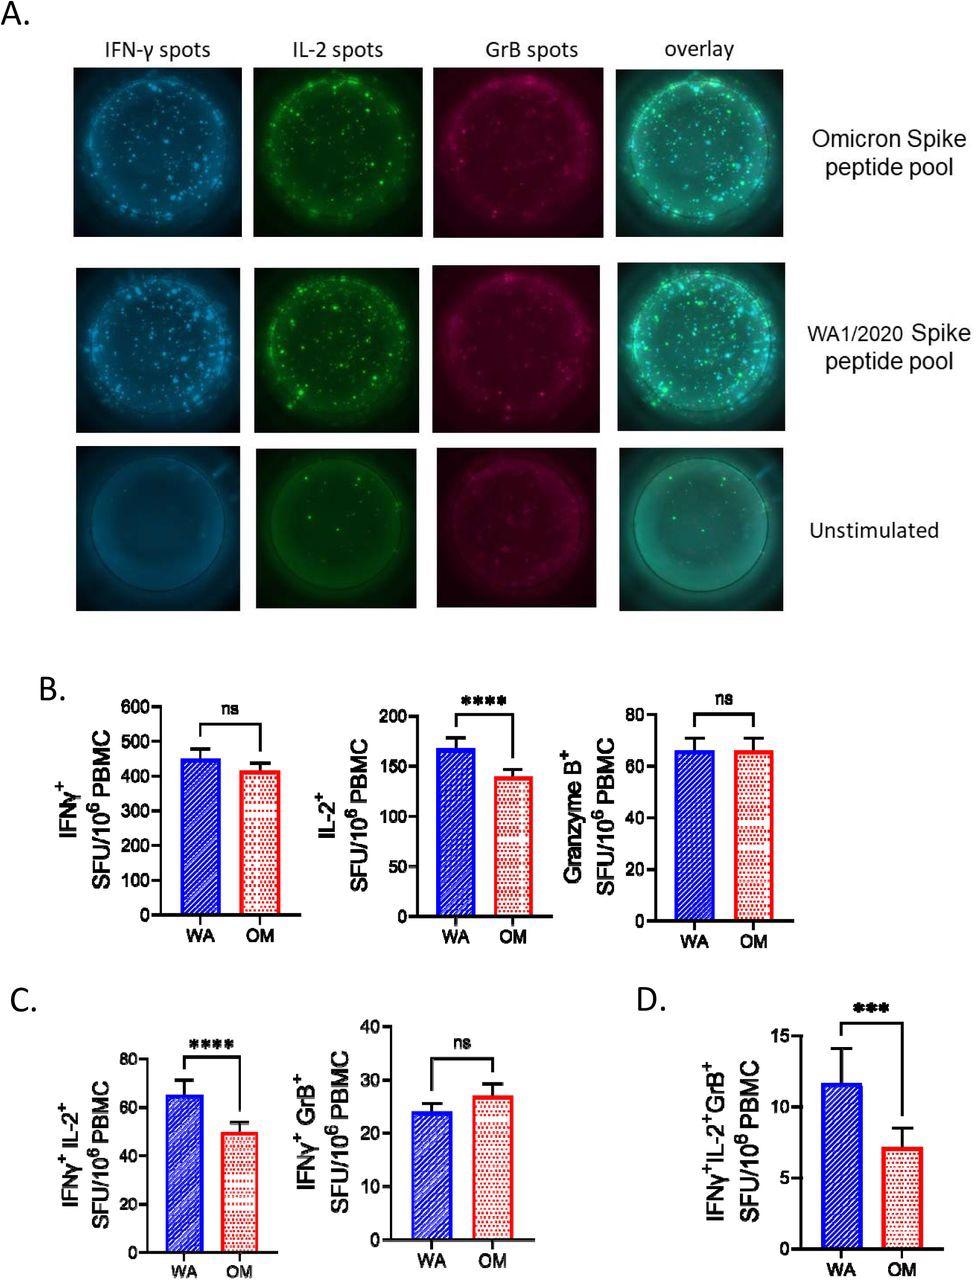 Robust SARS-CoV-2 specific T cells responses in immunized individuals A) 106 PBMCs per well were stimulated with Spike peptide pools from USA-WA1/2020) and B.1.1.529 (Omicron) cultured for 42h in pre-coated IFN-γ, IL-2 and GrB FLUORISpot plates. Both peptide pools induced responses of all three cytokines compared to unstimulated wells. B) Ag-specific ELISpot numbers were calculated by subtracting the unstimulated wells of each participant from the peptide stimulated wells. All immunized subjects (post infection and vaccinated) were pooled together (N=326). Omicron peptide pool induced equal IFN-γ and GrB response compared to USA-WA1/2020 but lower IL-2. C) Number of polyfunctional IFN-γ+IL-2+ cells but not IFN-γ+GrB+ cells was reduced after stimulation with Omicron spike peptide pool. D) Triple positive IFN-γ+IL-2+GrB+ were also reduced following stimulation with Omicron peptides. Data presented as mean ± standard error of the mean. Two-tailed Wilcoxon rank test. For all statistical differences *p<0.05, **p<0.01, ***p<0.001. ****p<0.0001.